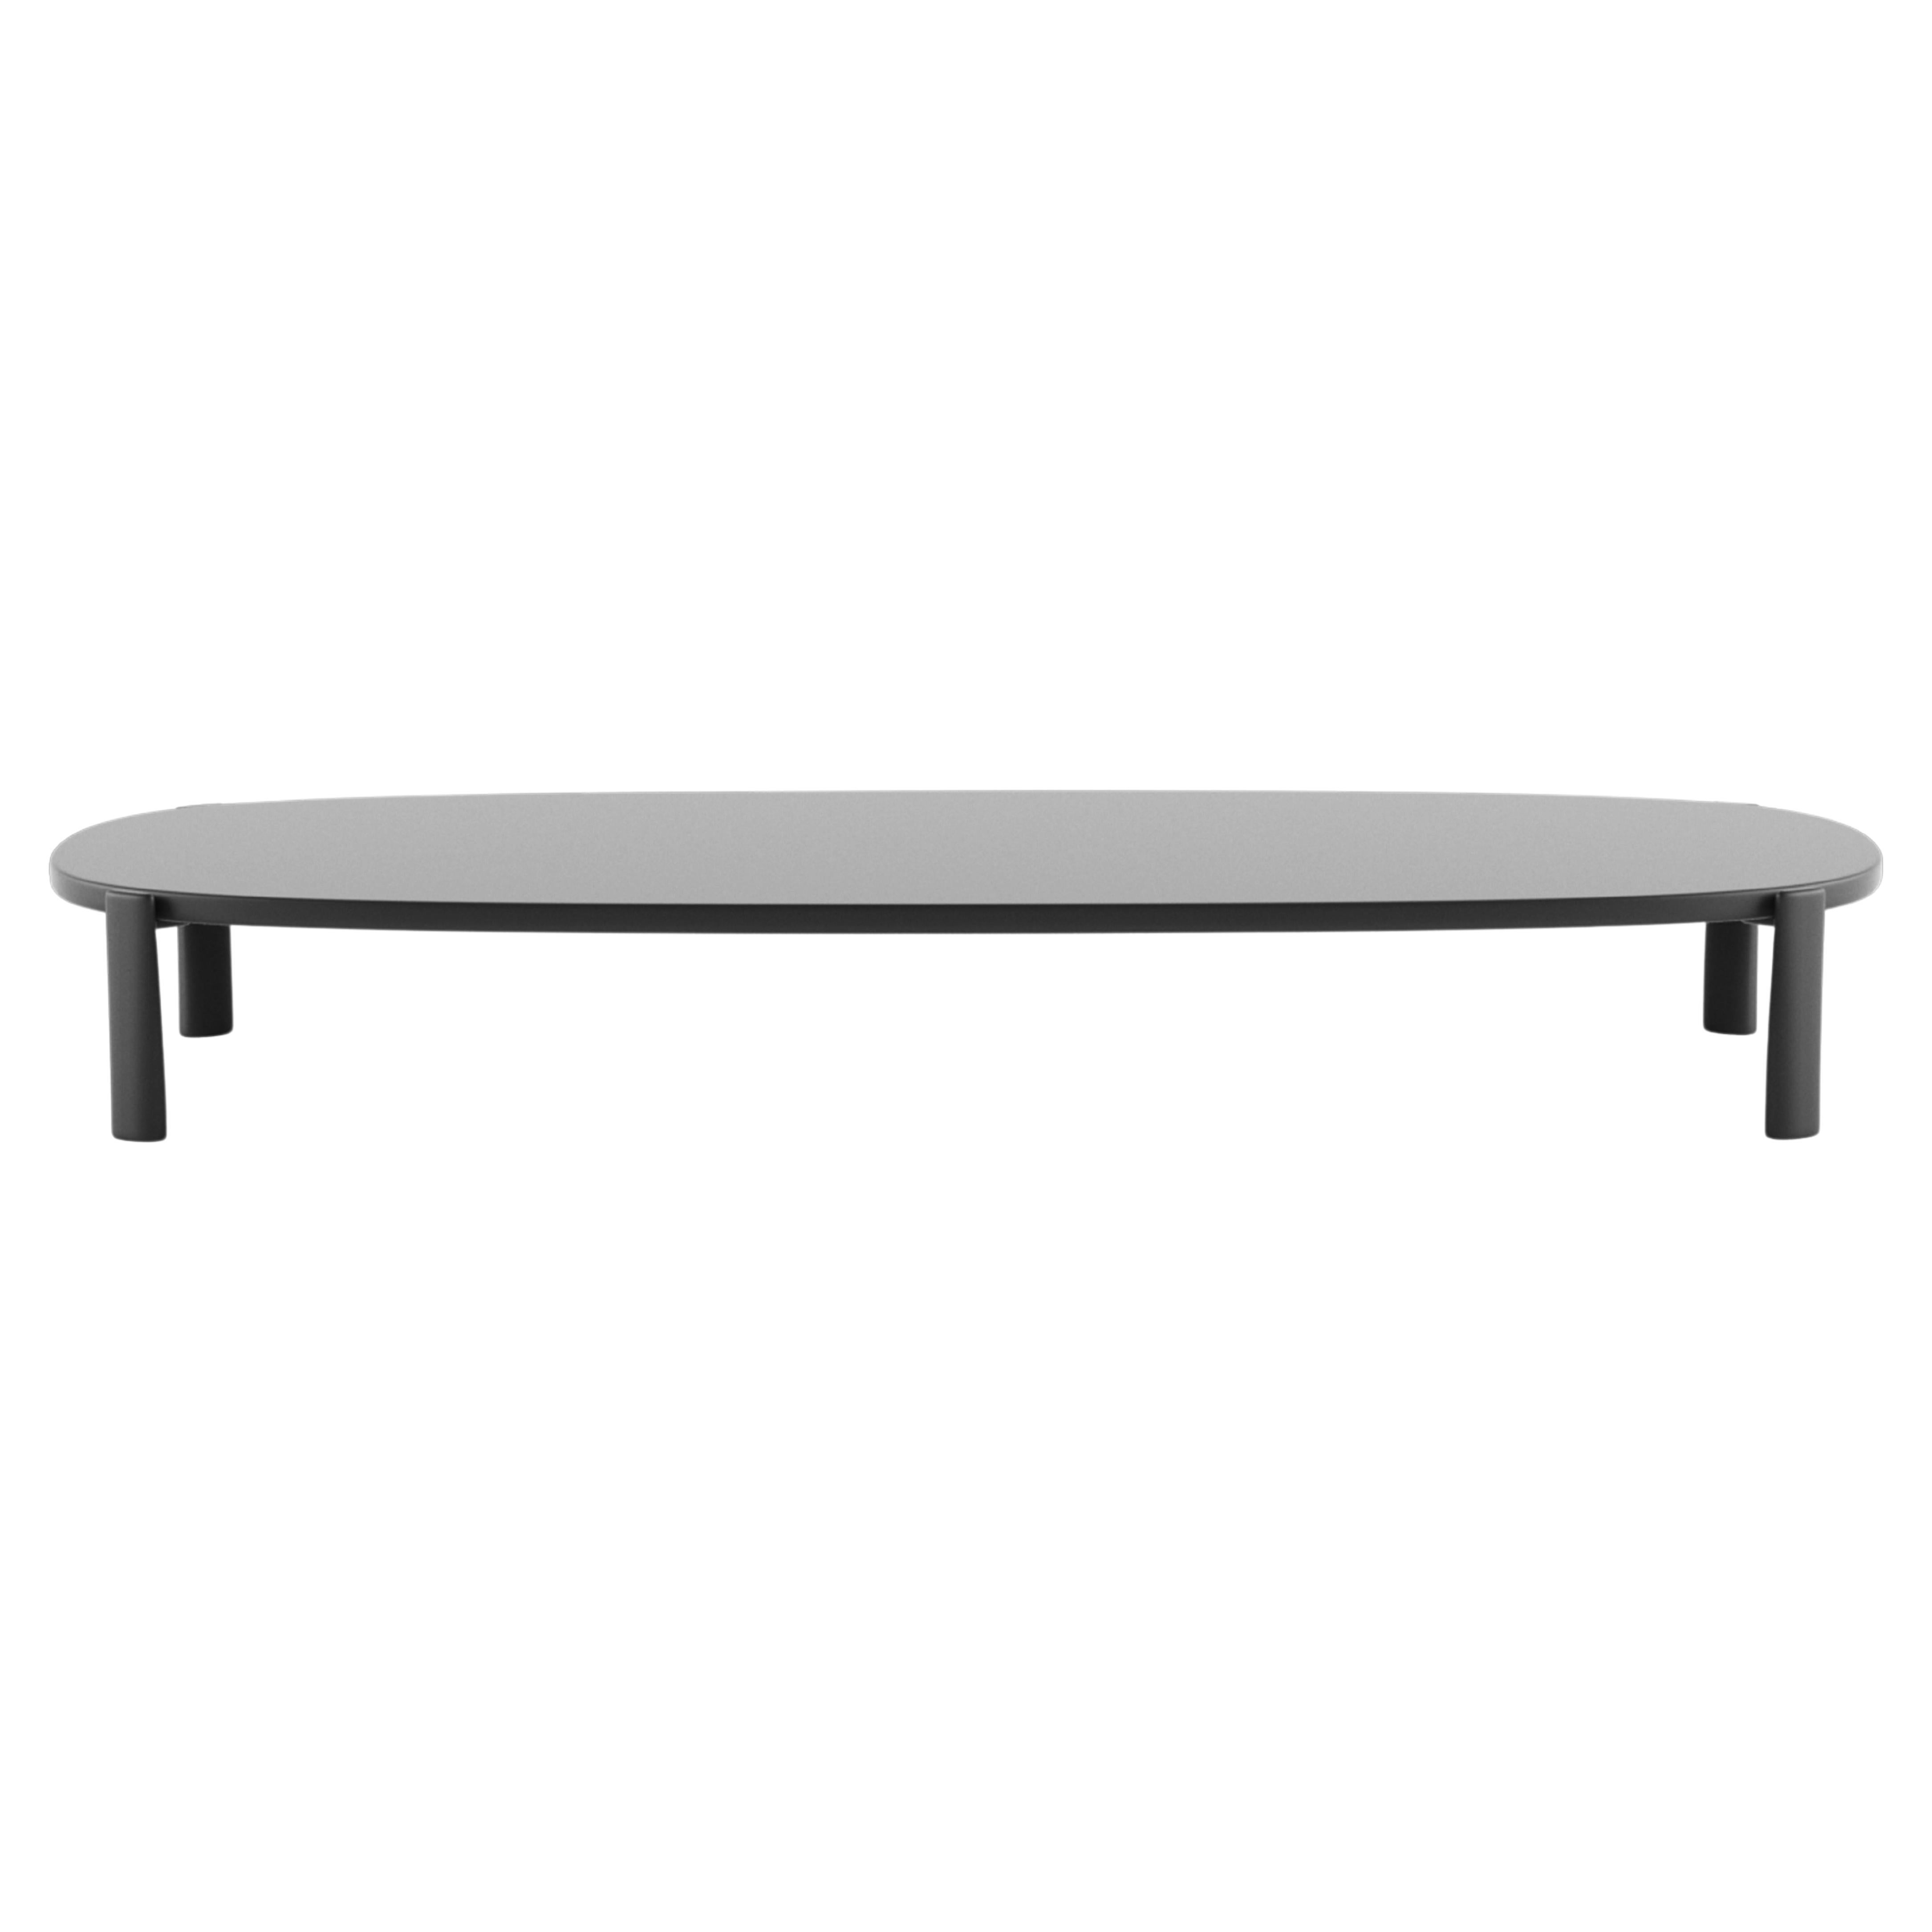 Alias T10_O Ten Outdoor Table 120x60 in Grey Ceramic Top with Lacquered Frame